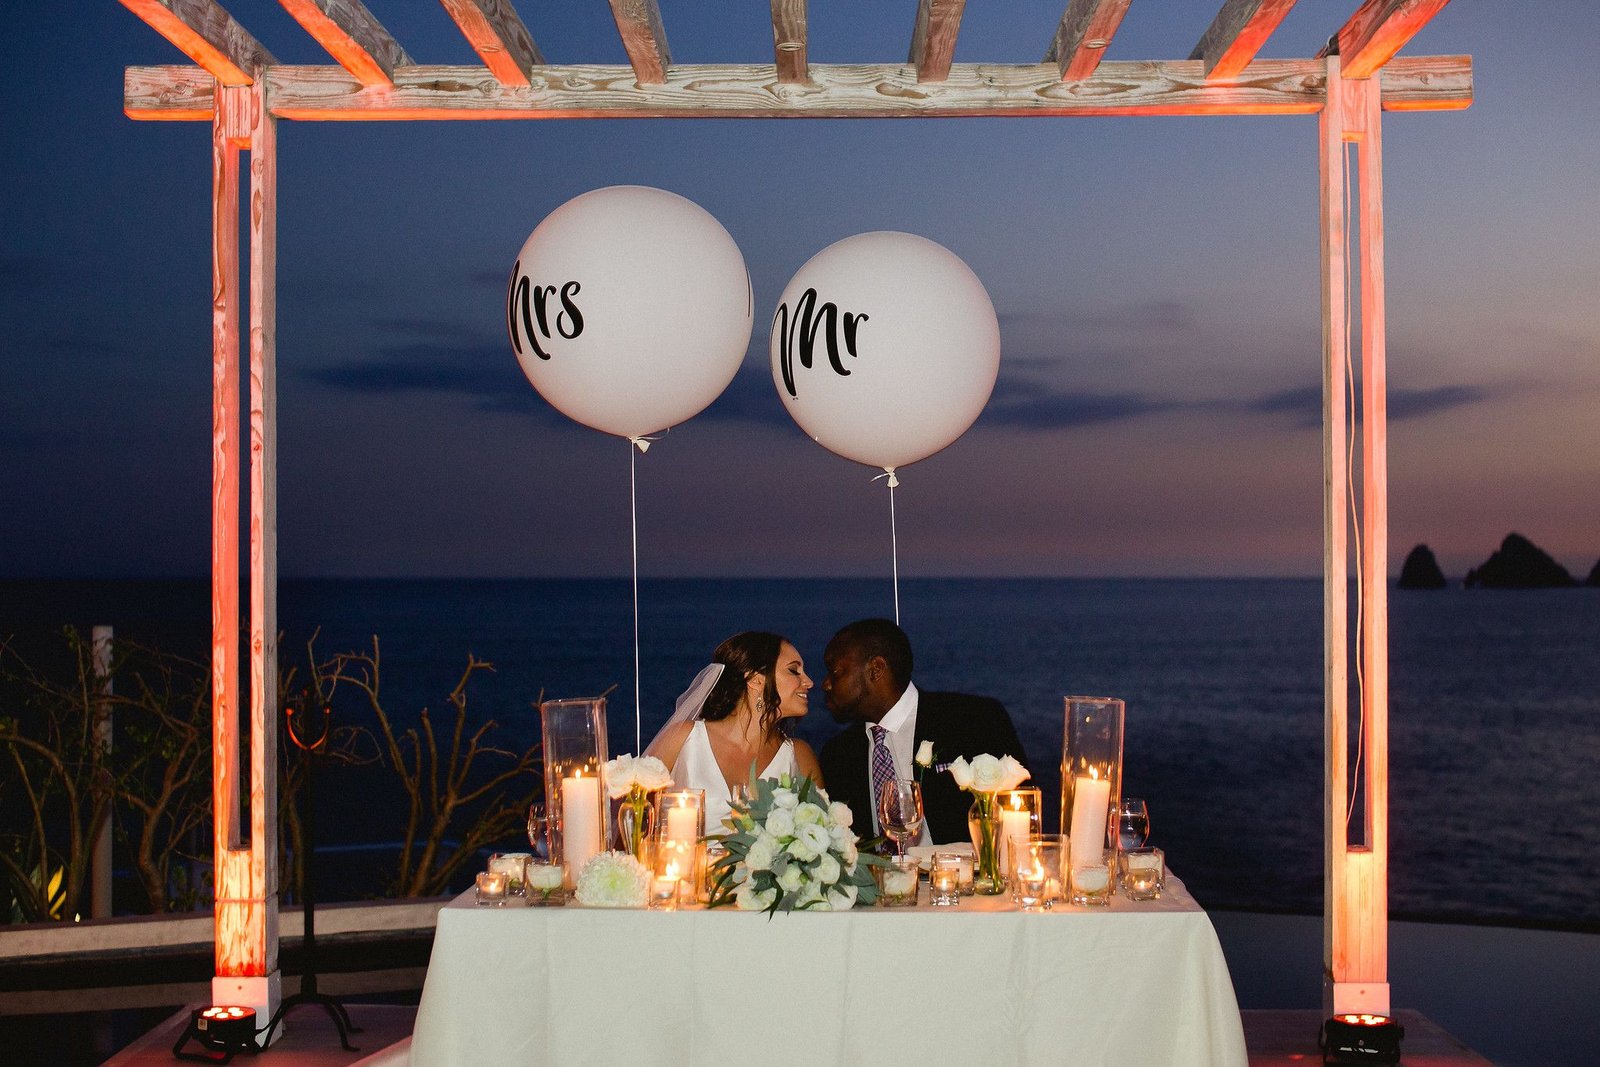 Bride and Groom at their sweetheart table at famous wedding venue in Cabo San Lucas, Mexico. Wedding planning and design by Cabo Wedding Services